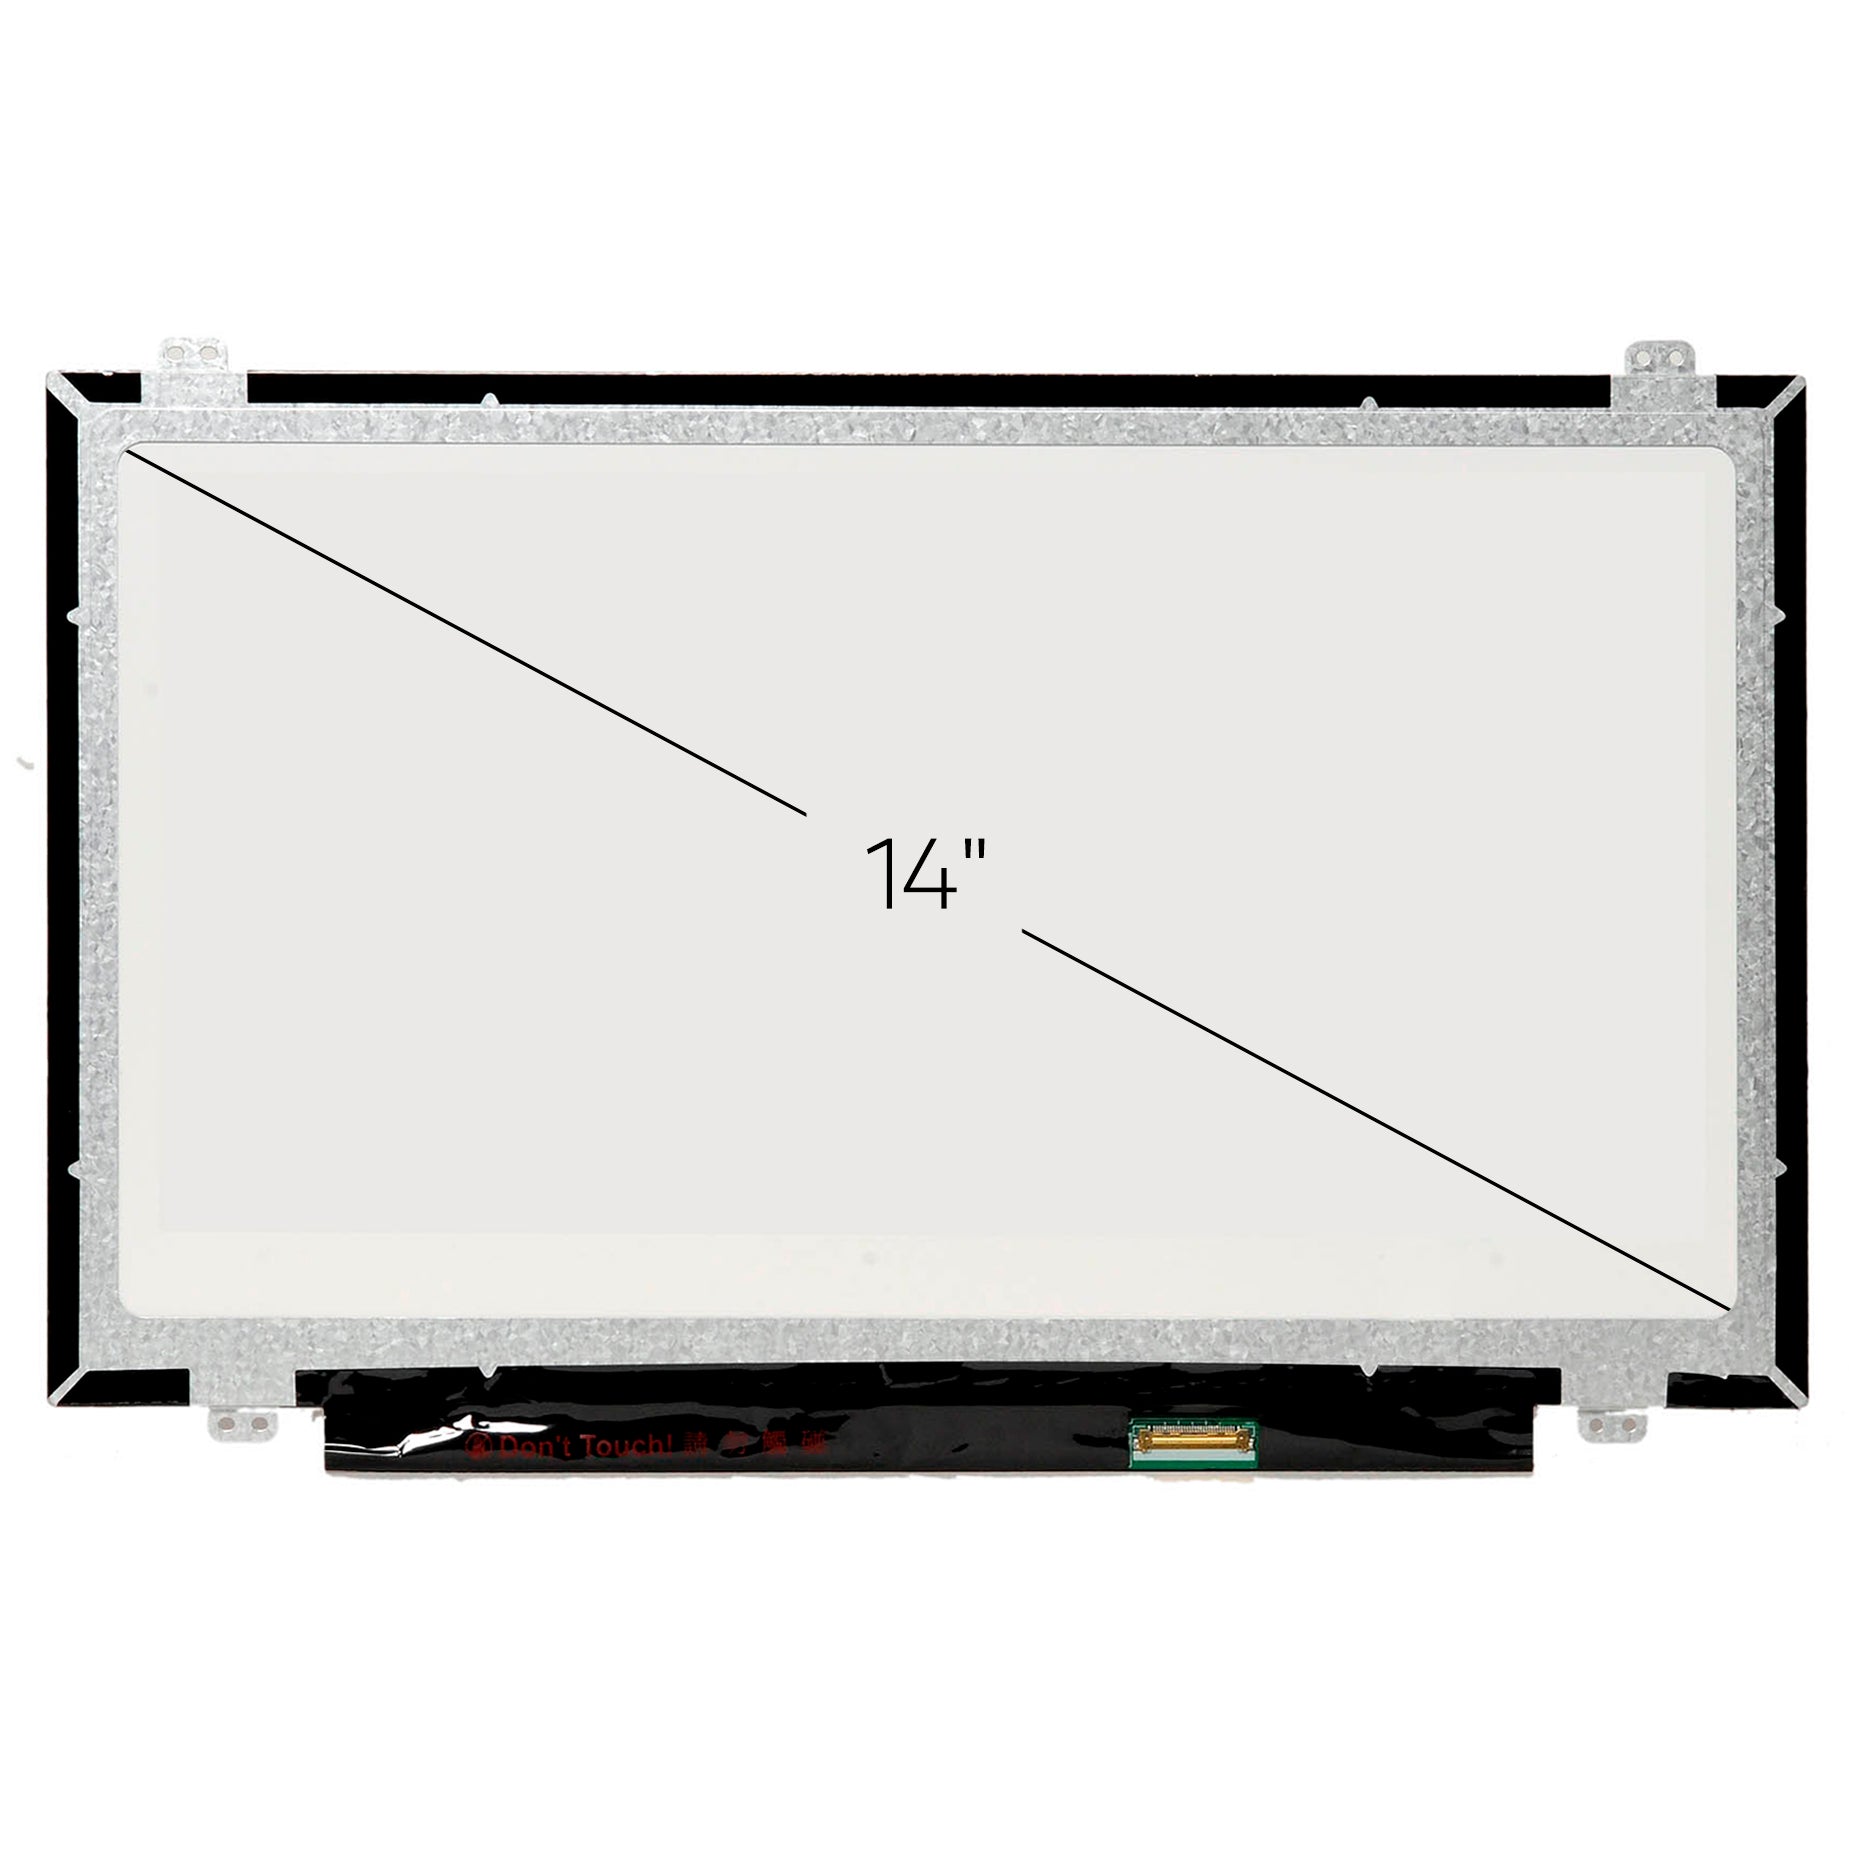 Screen Replacement for HP Probook 440 G3 HD 1366x768 Glossy LCD LED Display